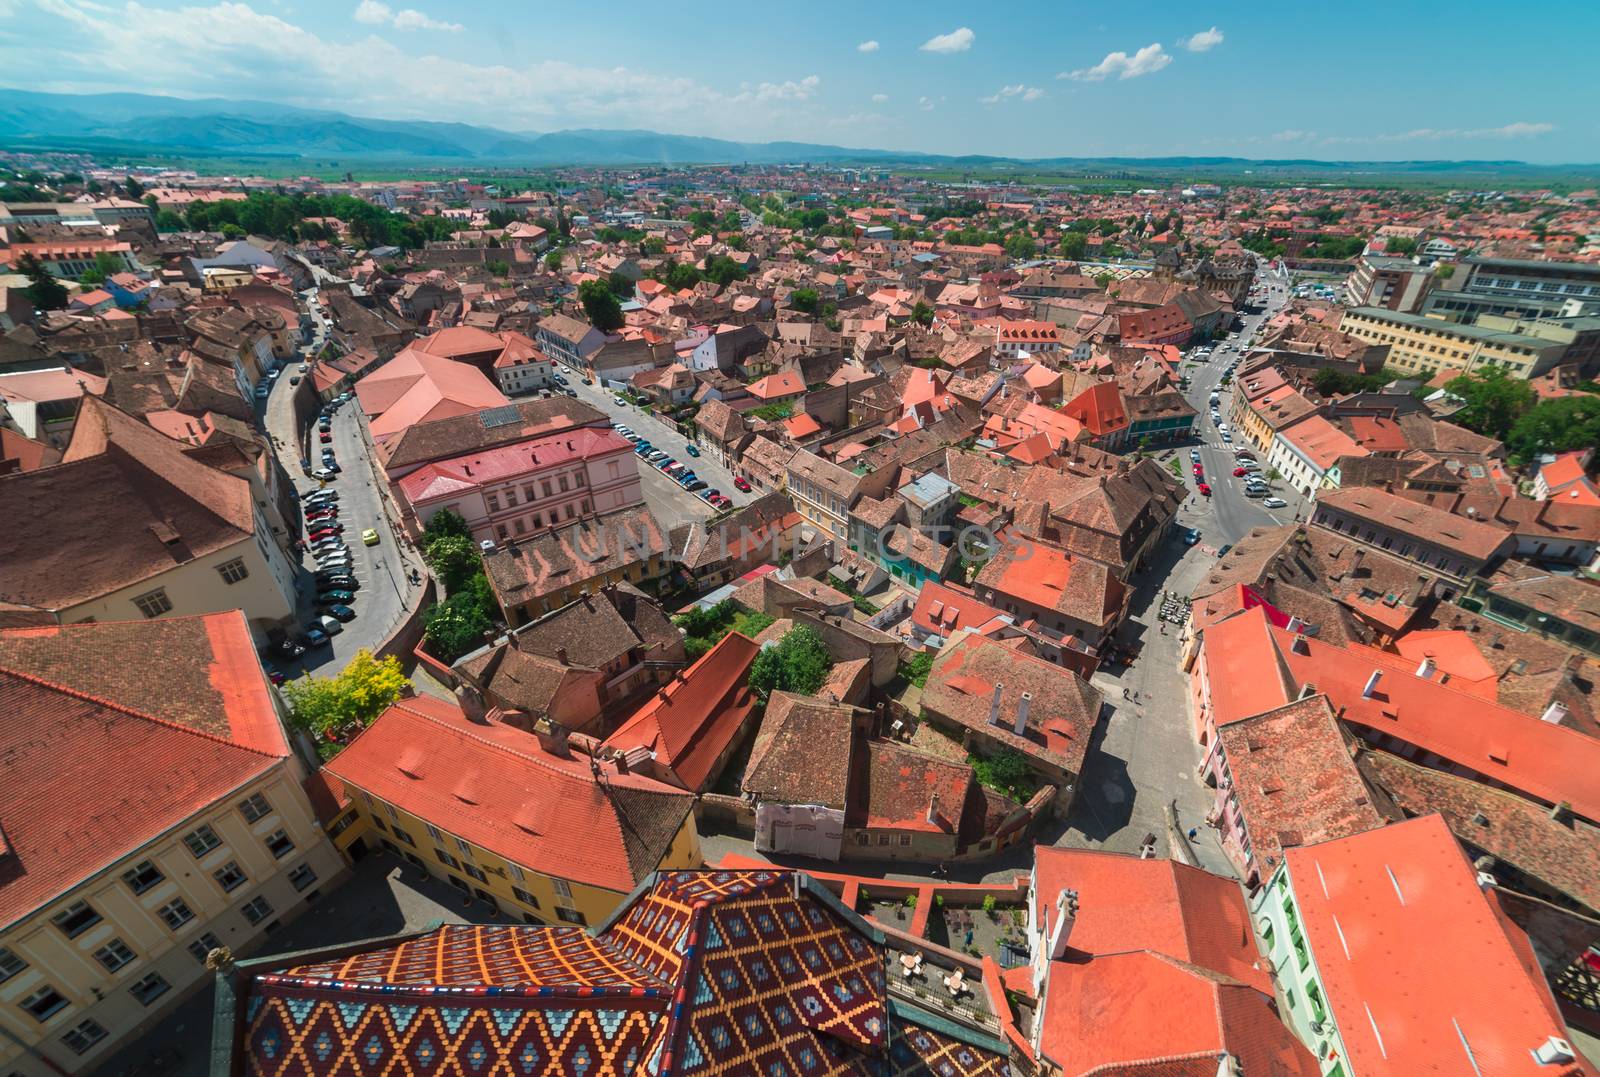 Sibiu is a city in the heart of Romania. It was the capital of Transylvania in the antiquities.